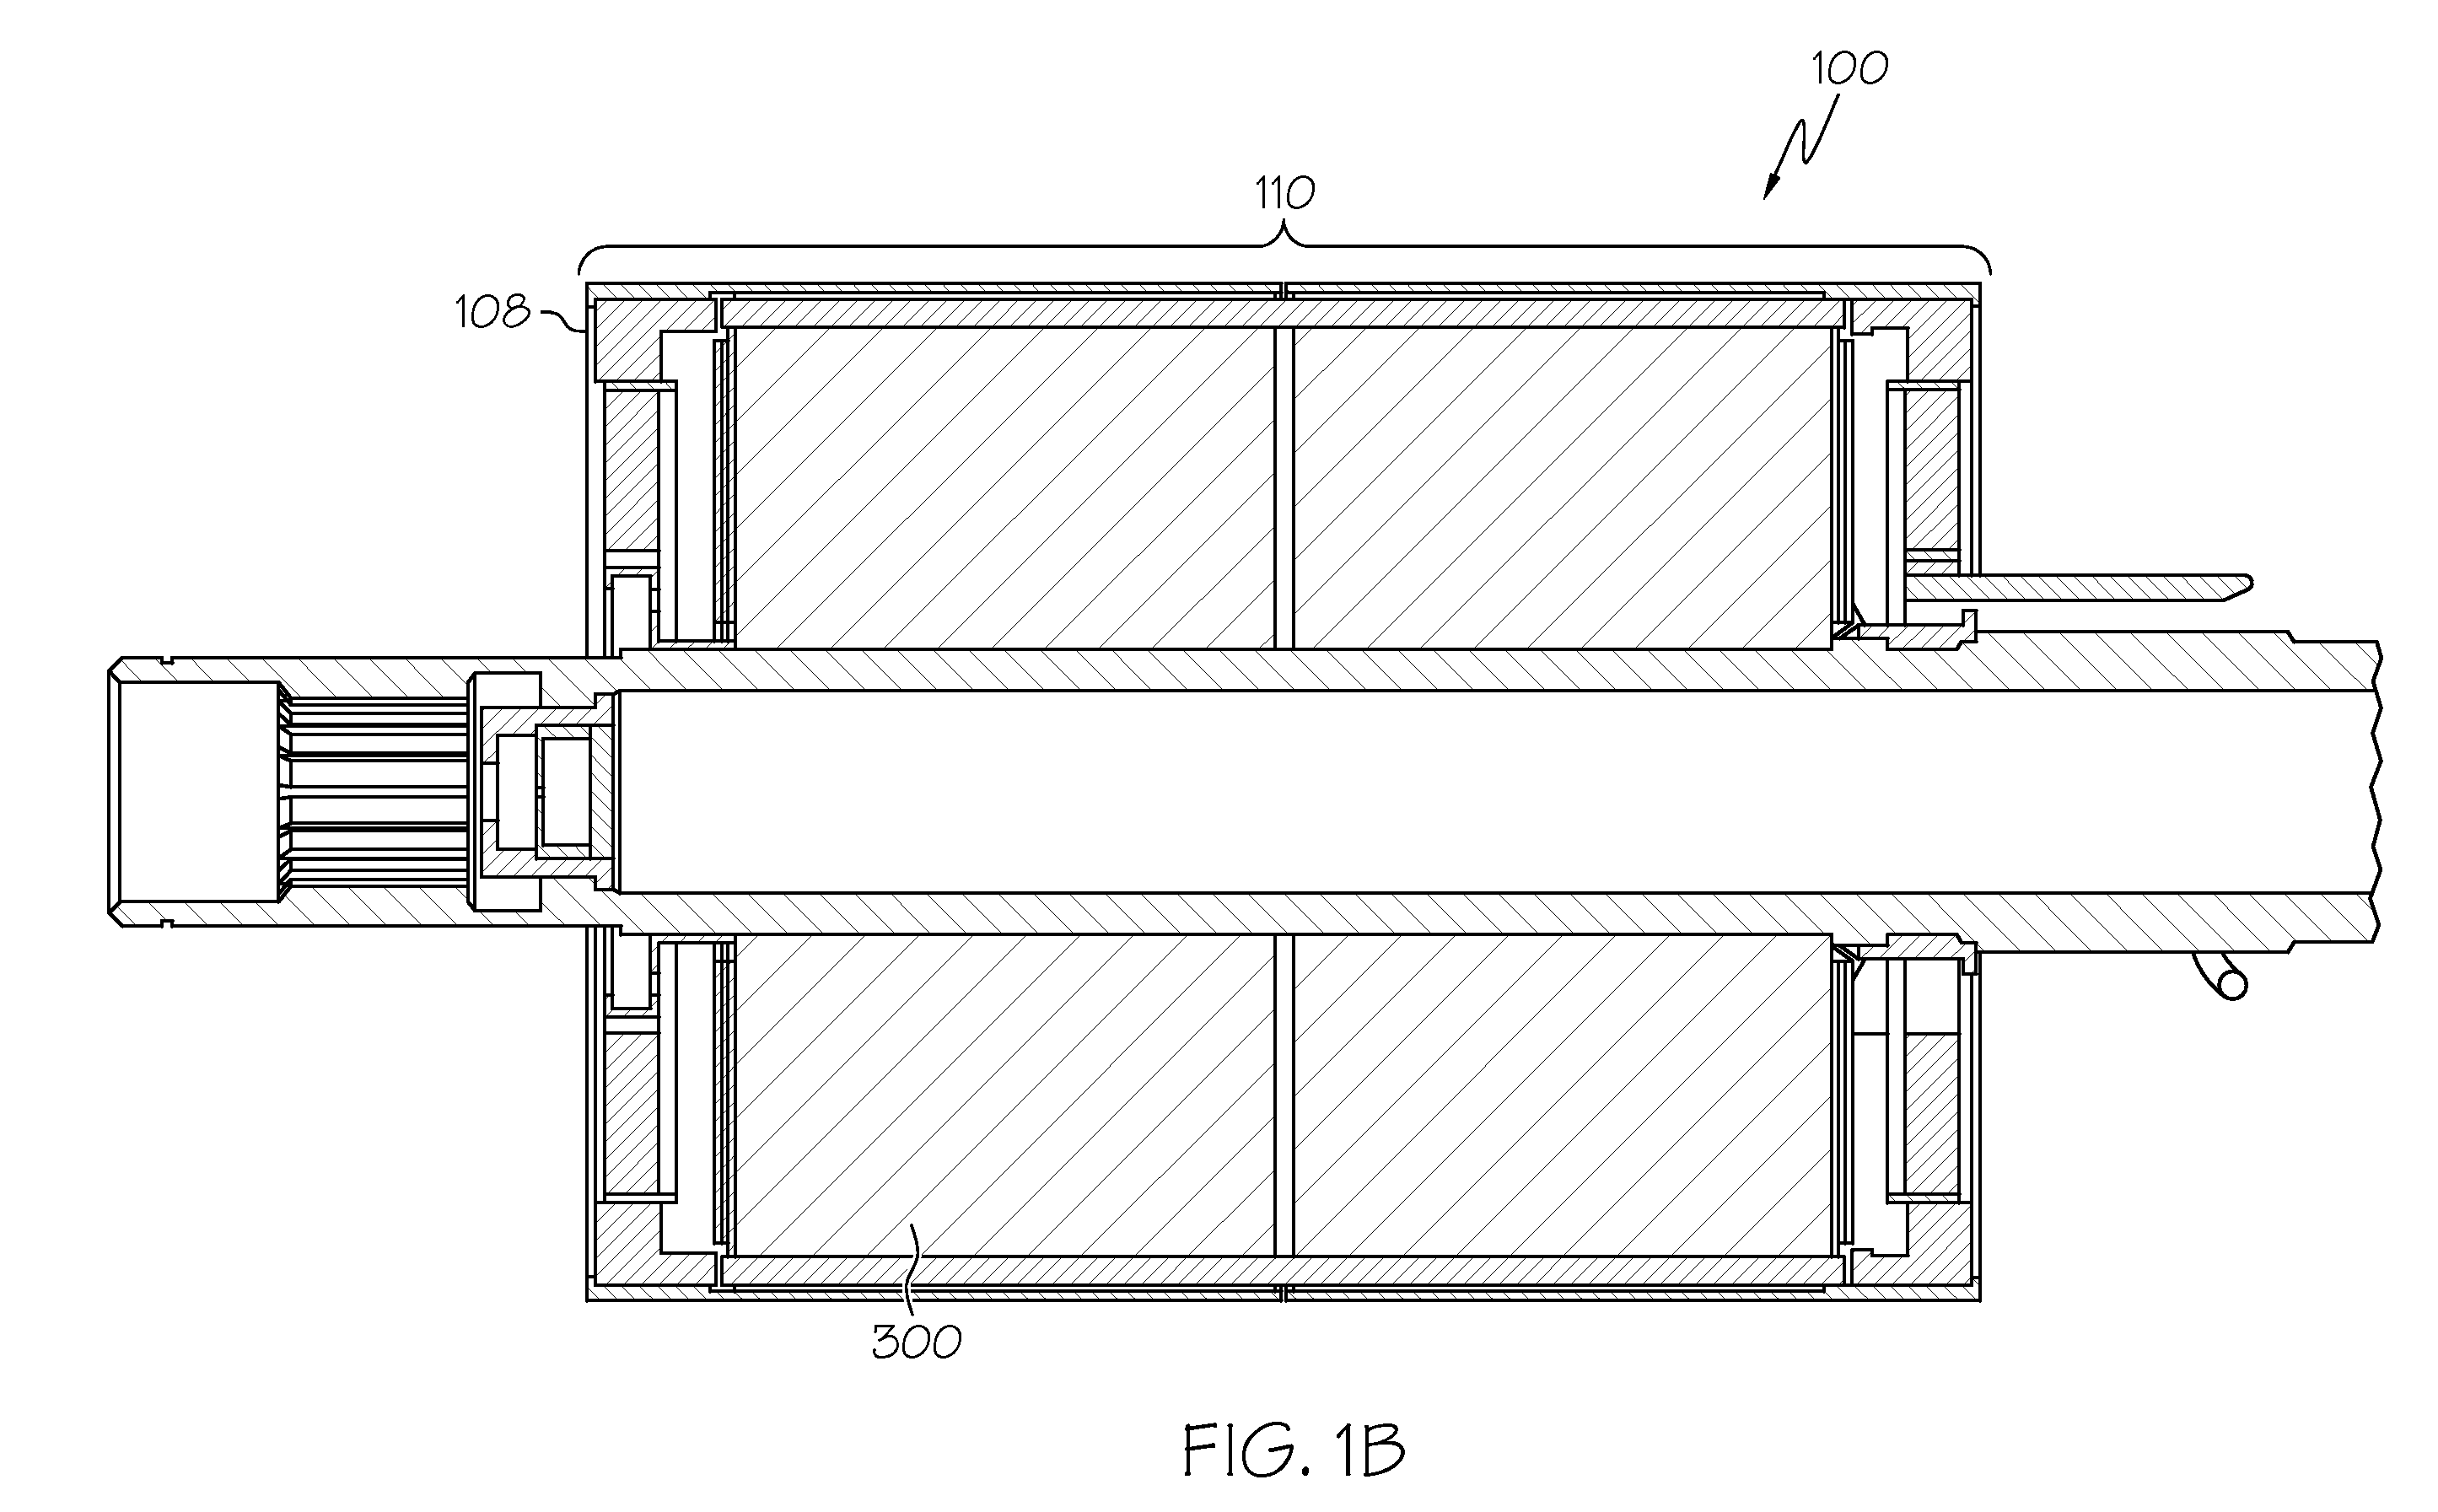 High speed generator rotor design incorporating positively restrained balance rings